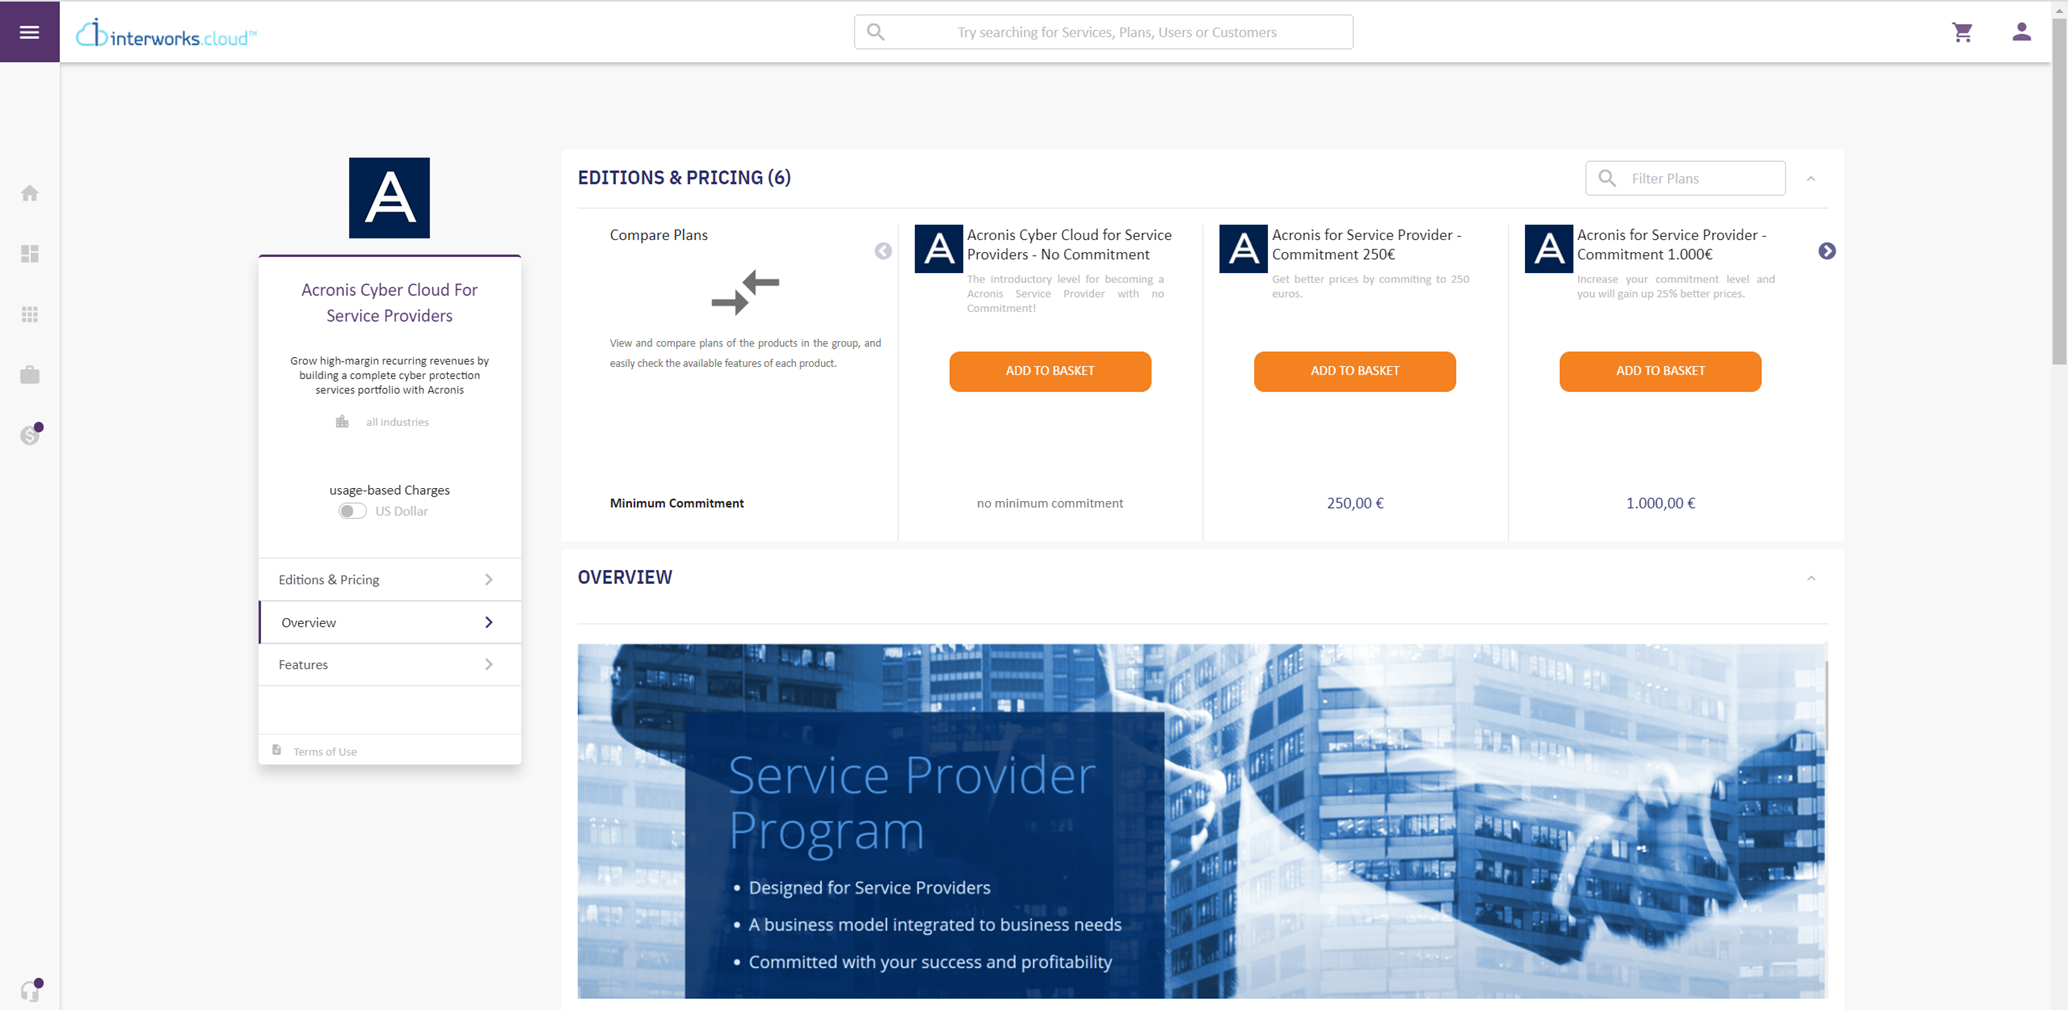 interworks.cloud marketplace ordering of a product